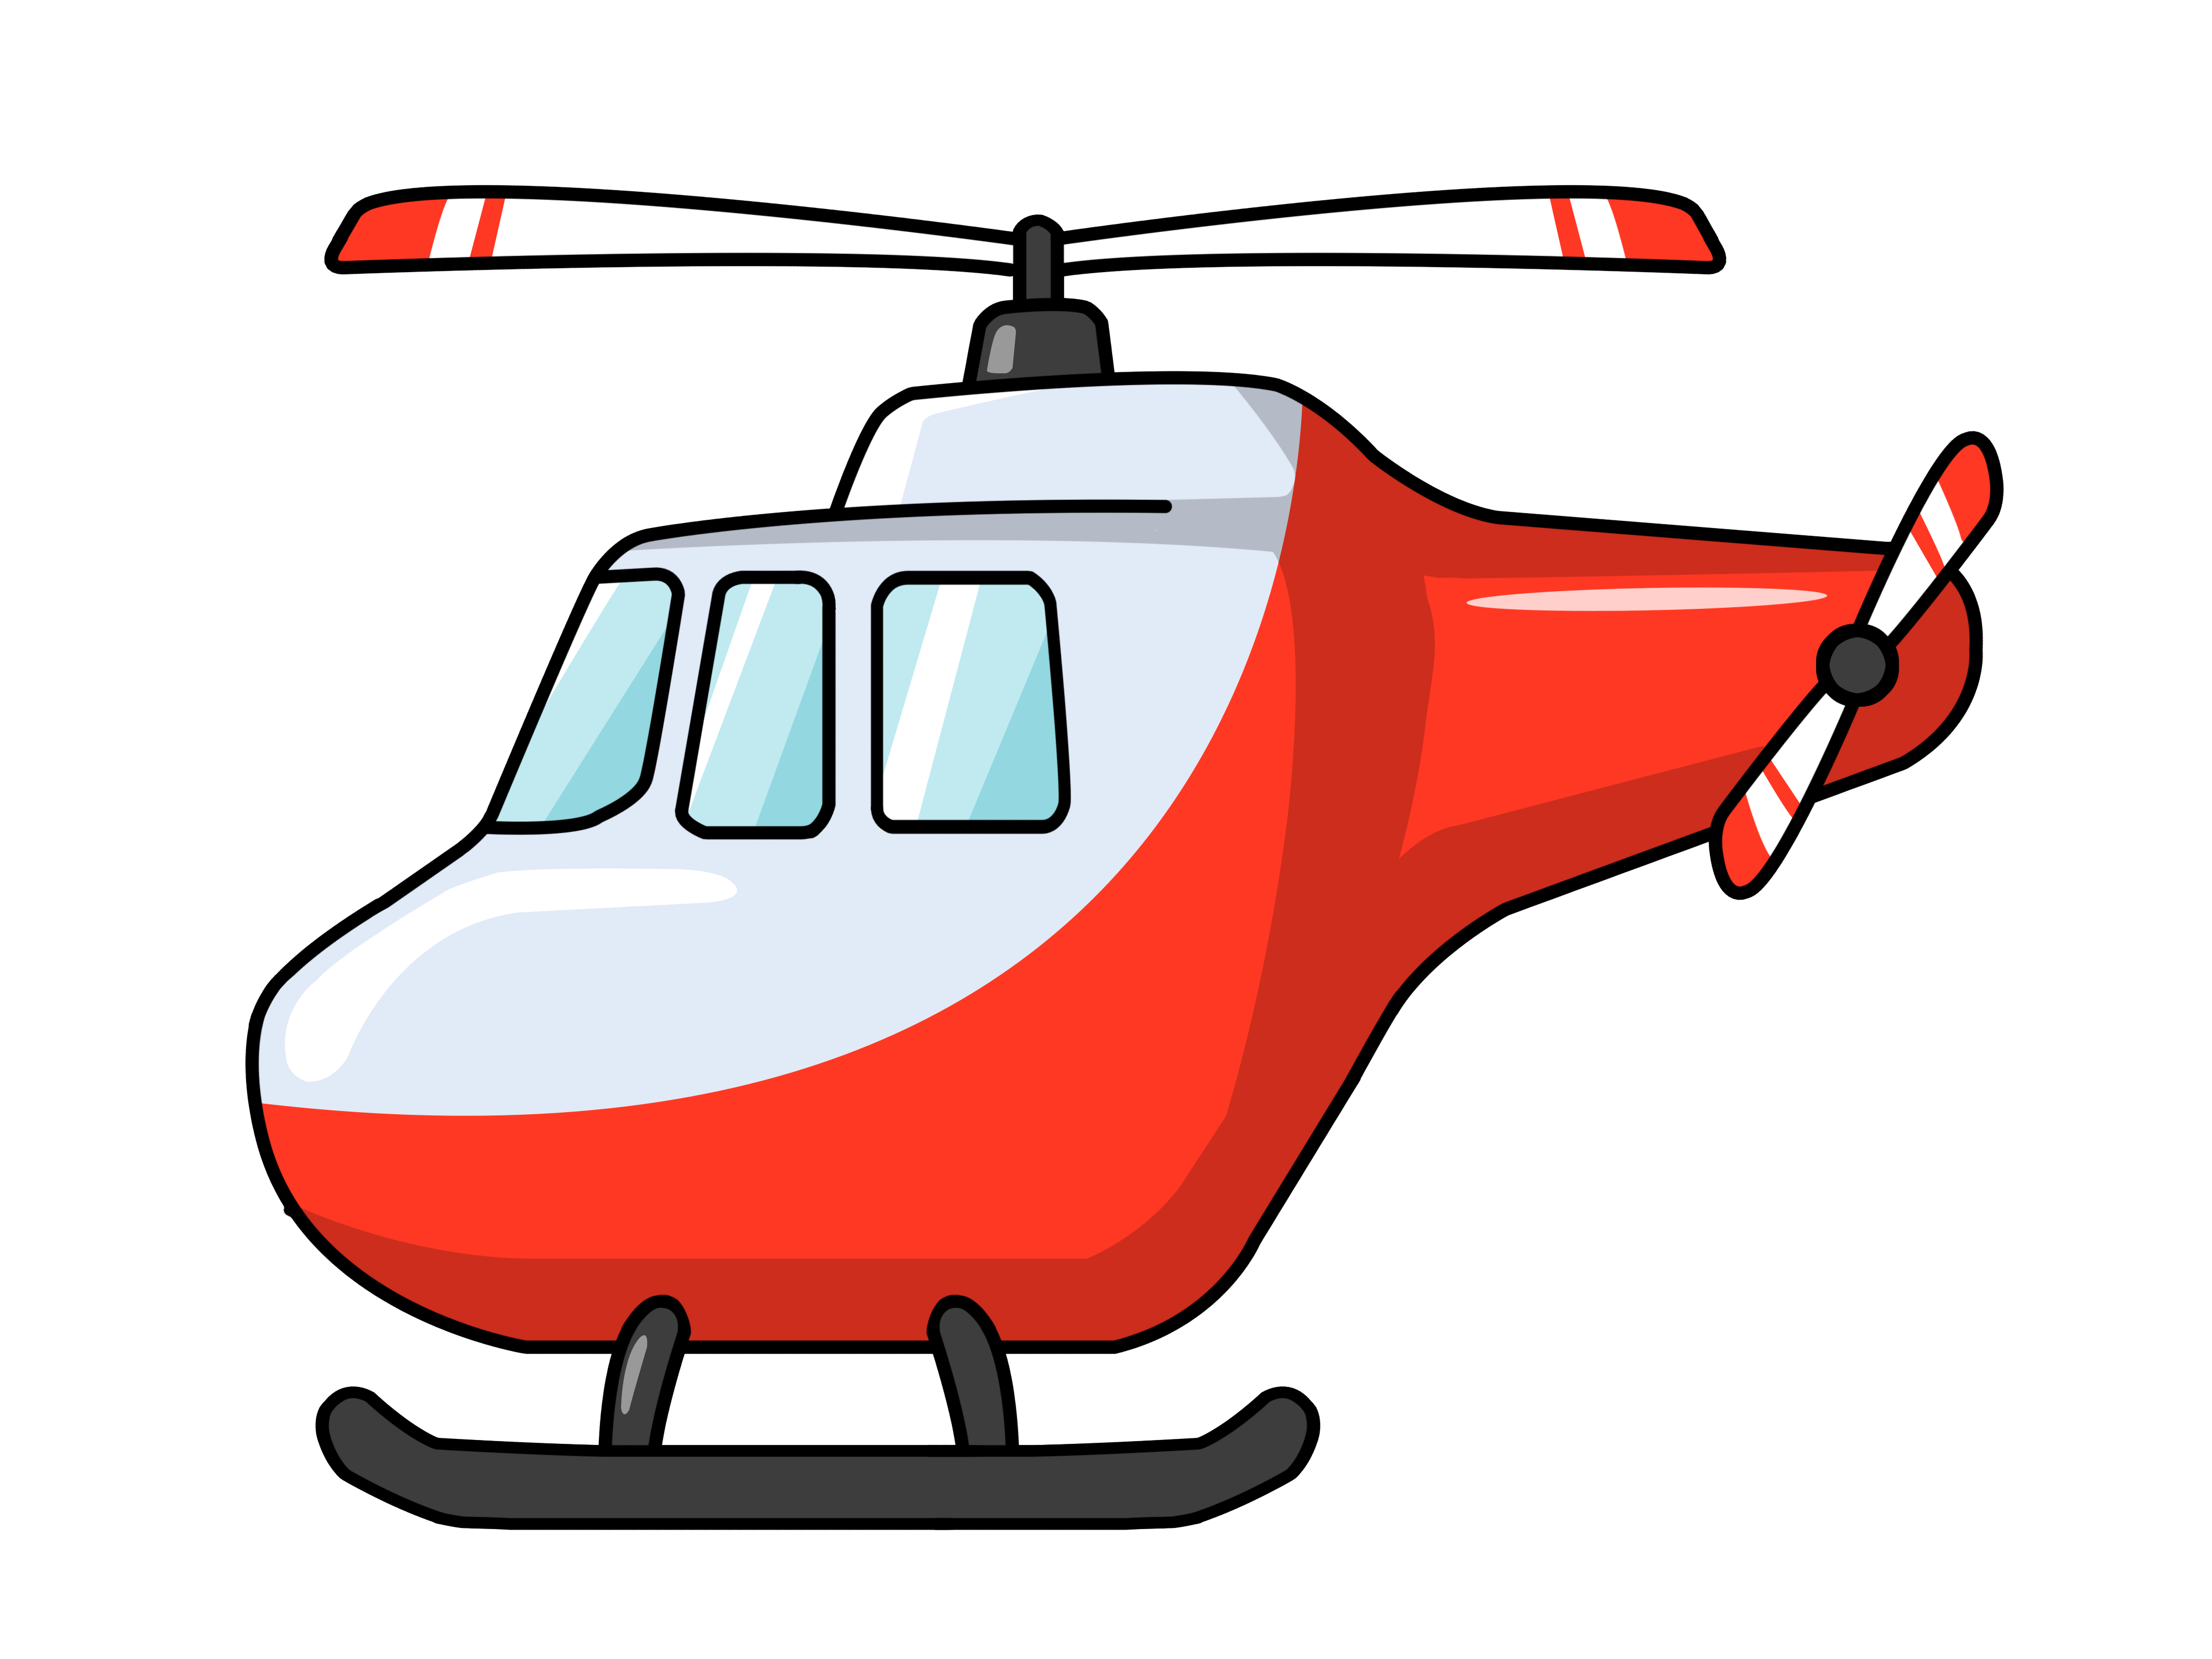 Helicopter clip art on. Wagon clipart old transportation